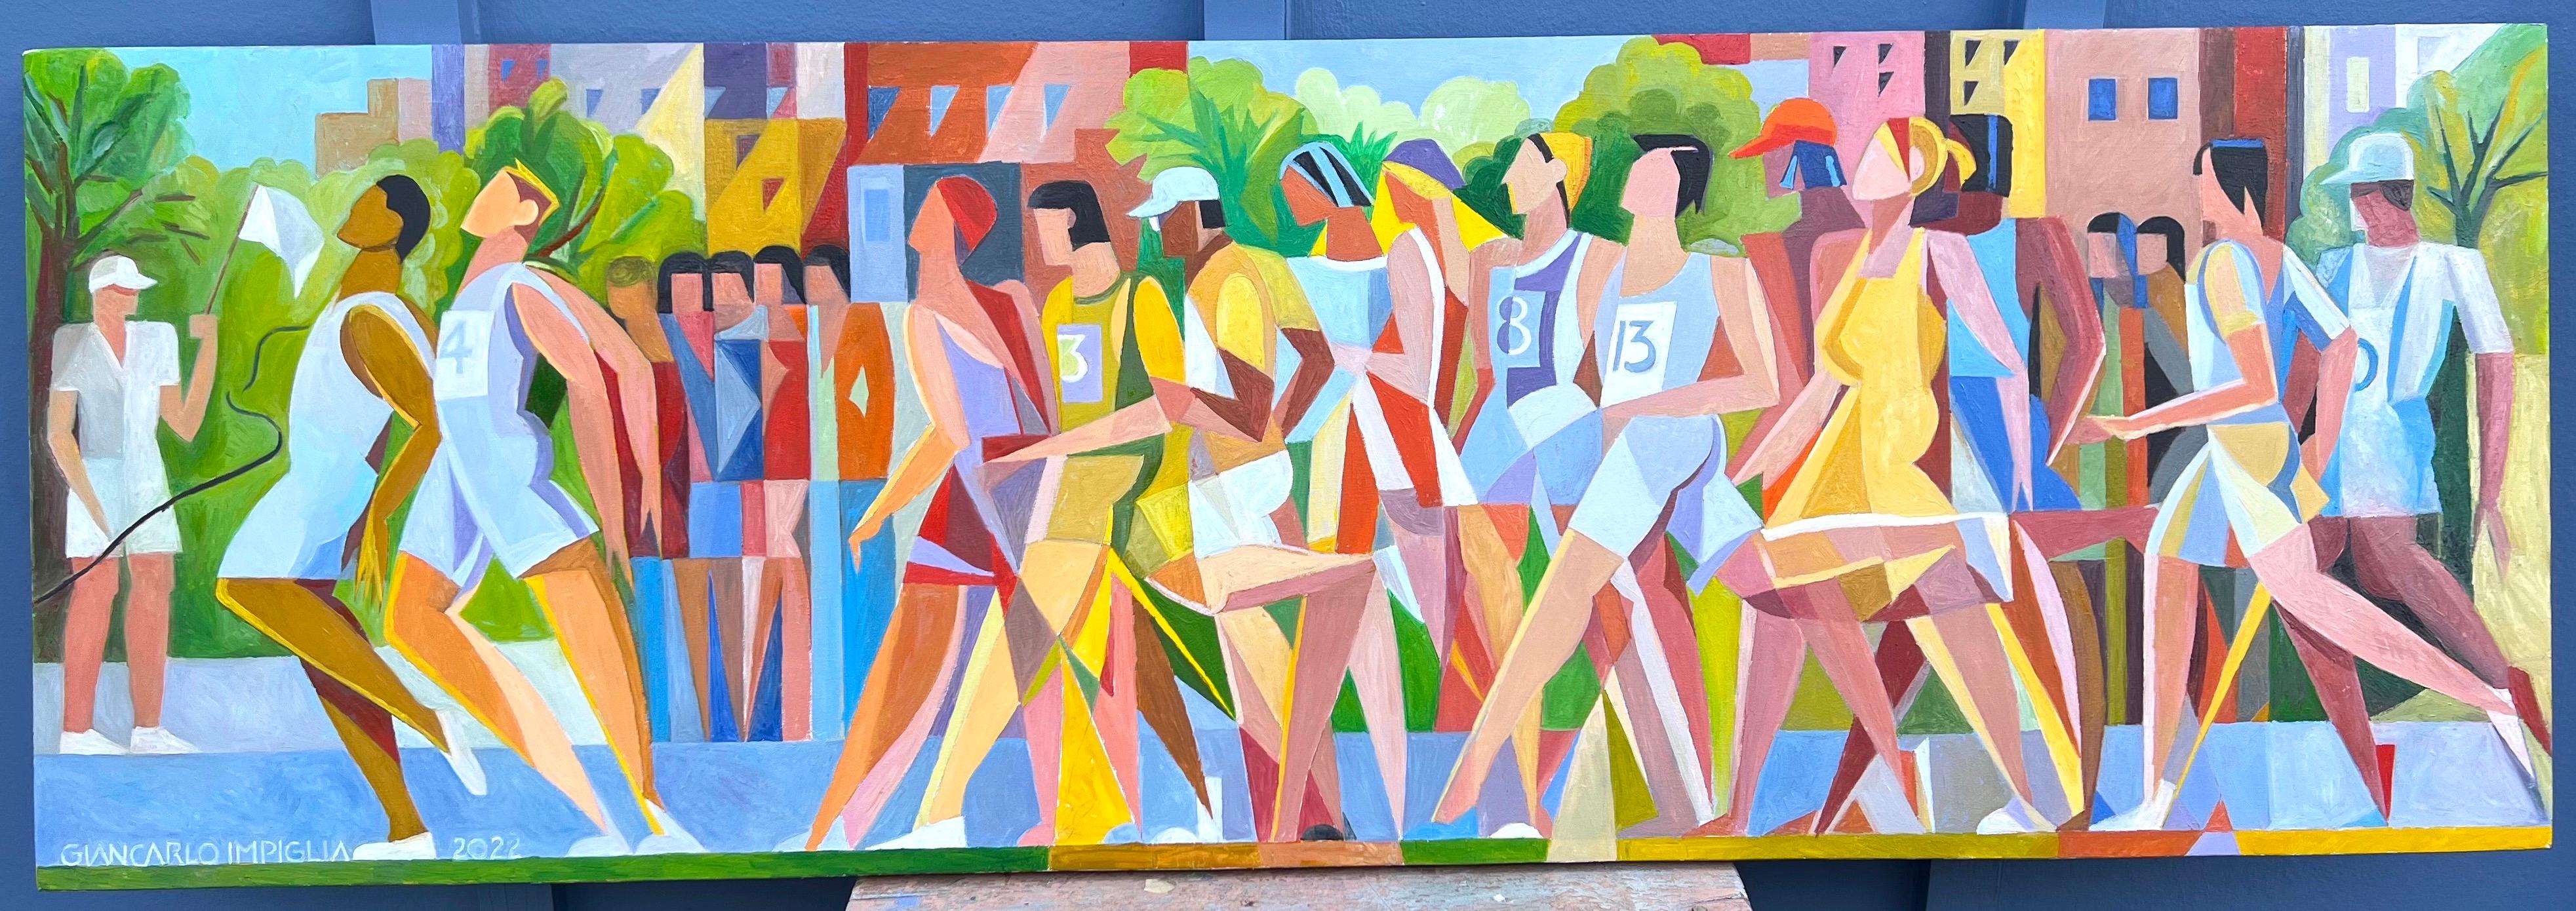 Giancarlo Impiglia Abstract Painting - Dynamic cubist style oil painting "Marathon" runners and Olympics 